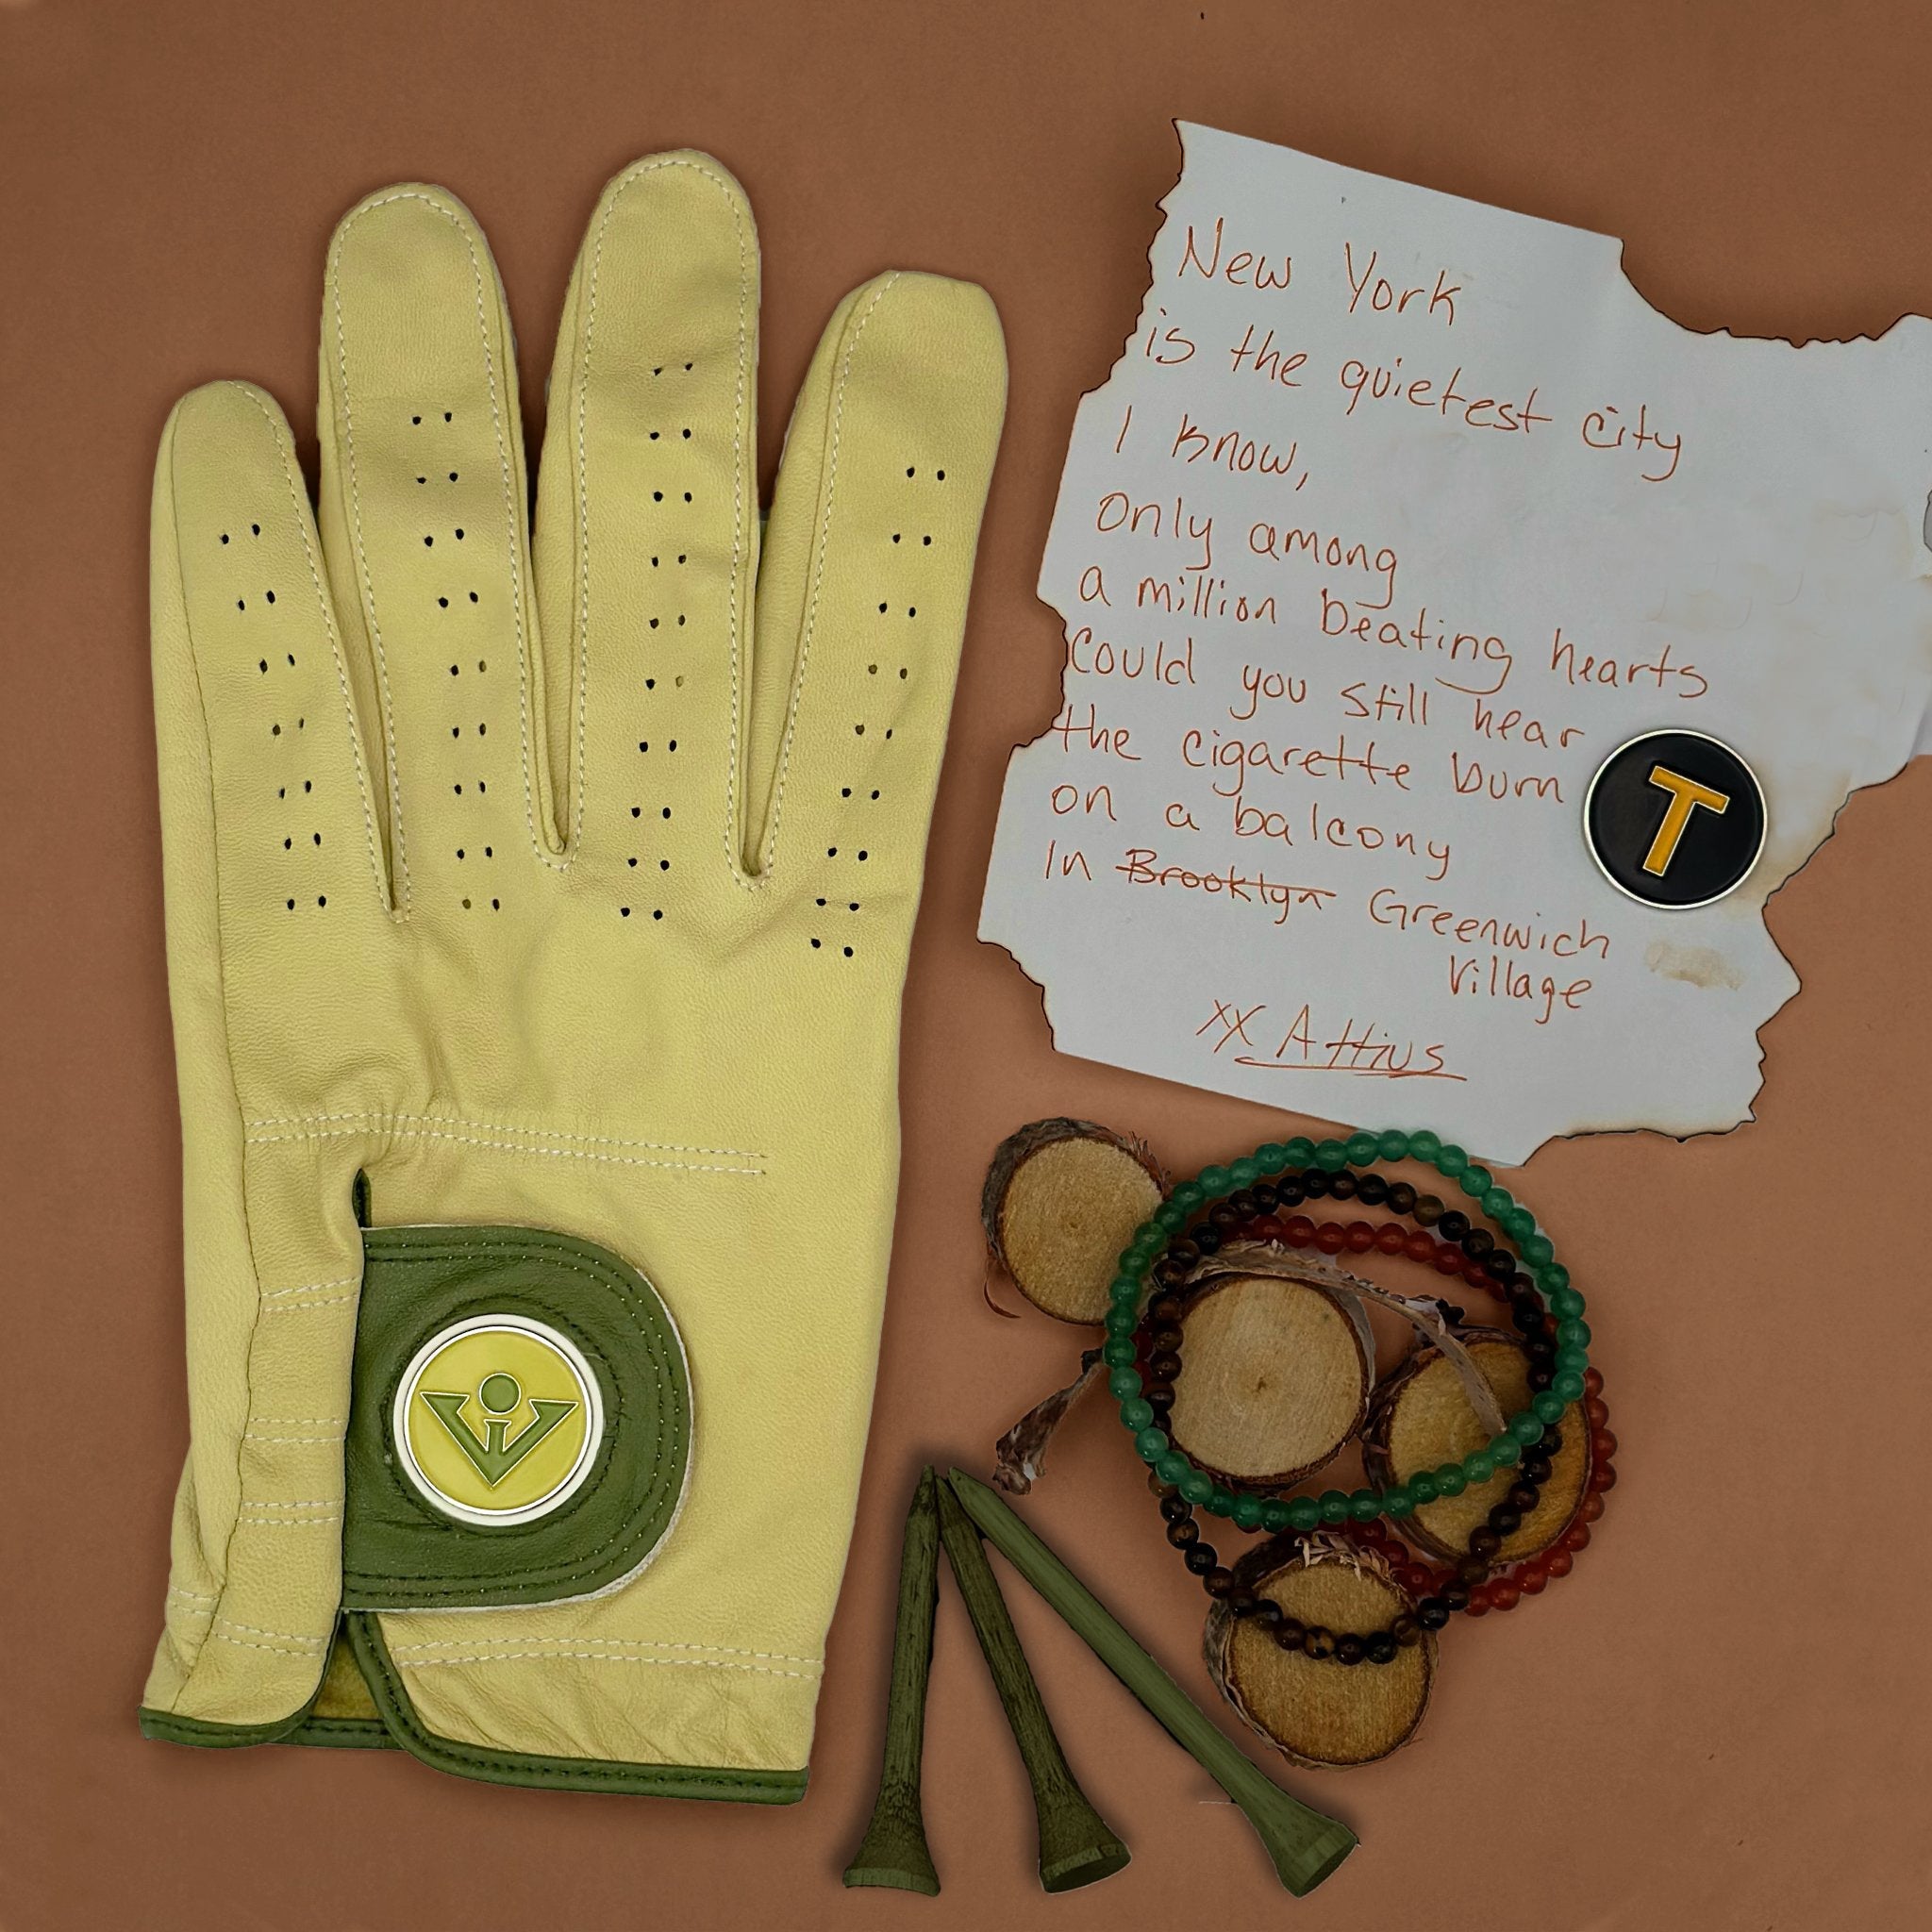 Yellow and Green golf glove surrounded by earthy tones, wood, and a poem to represent Greenwich Village's Bohemian Style.